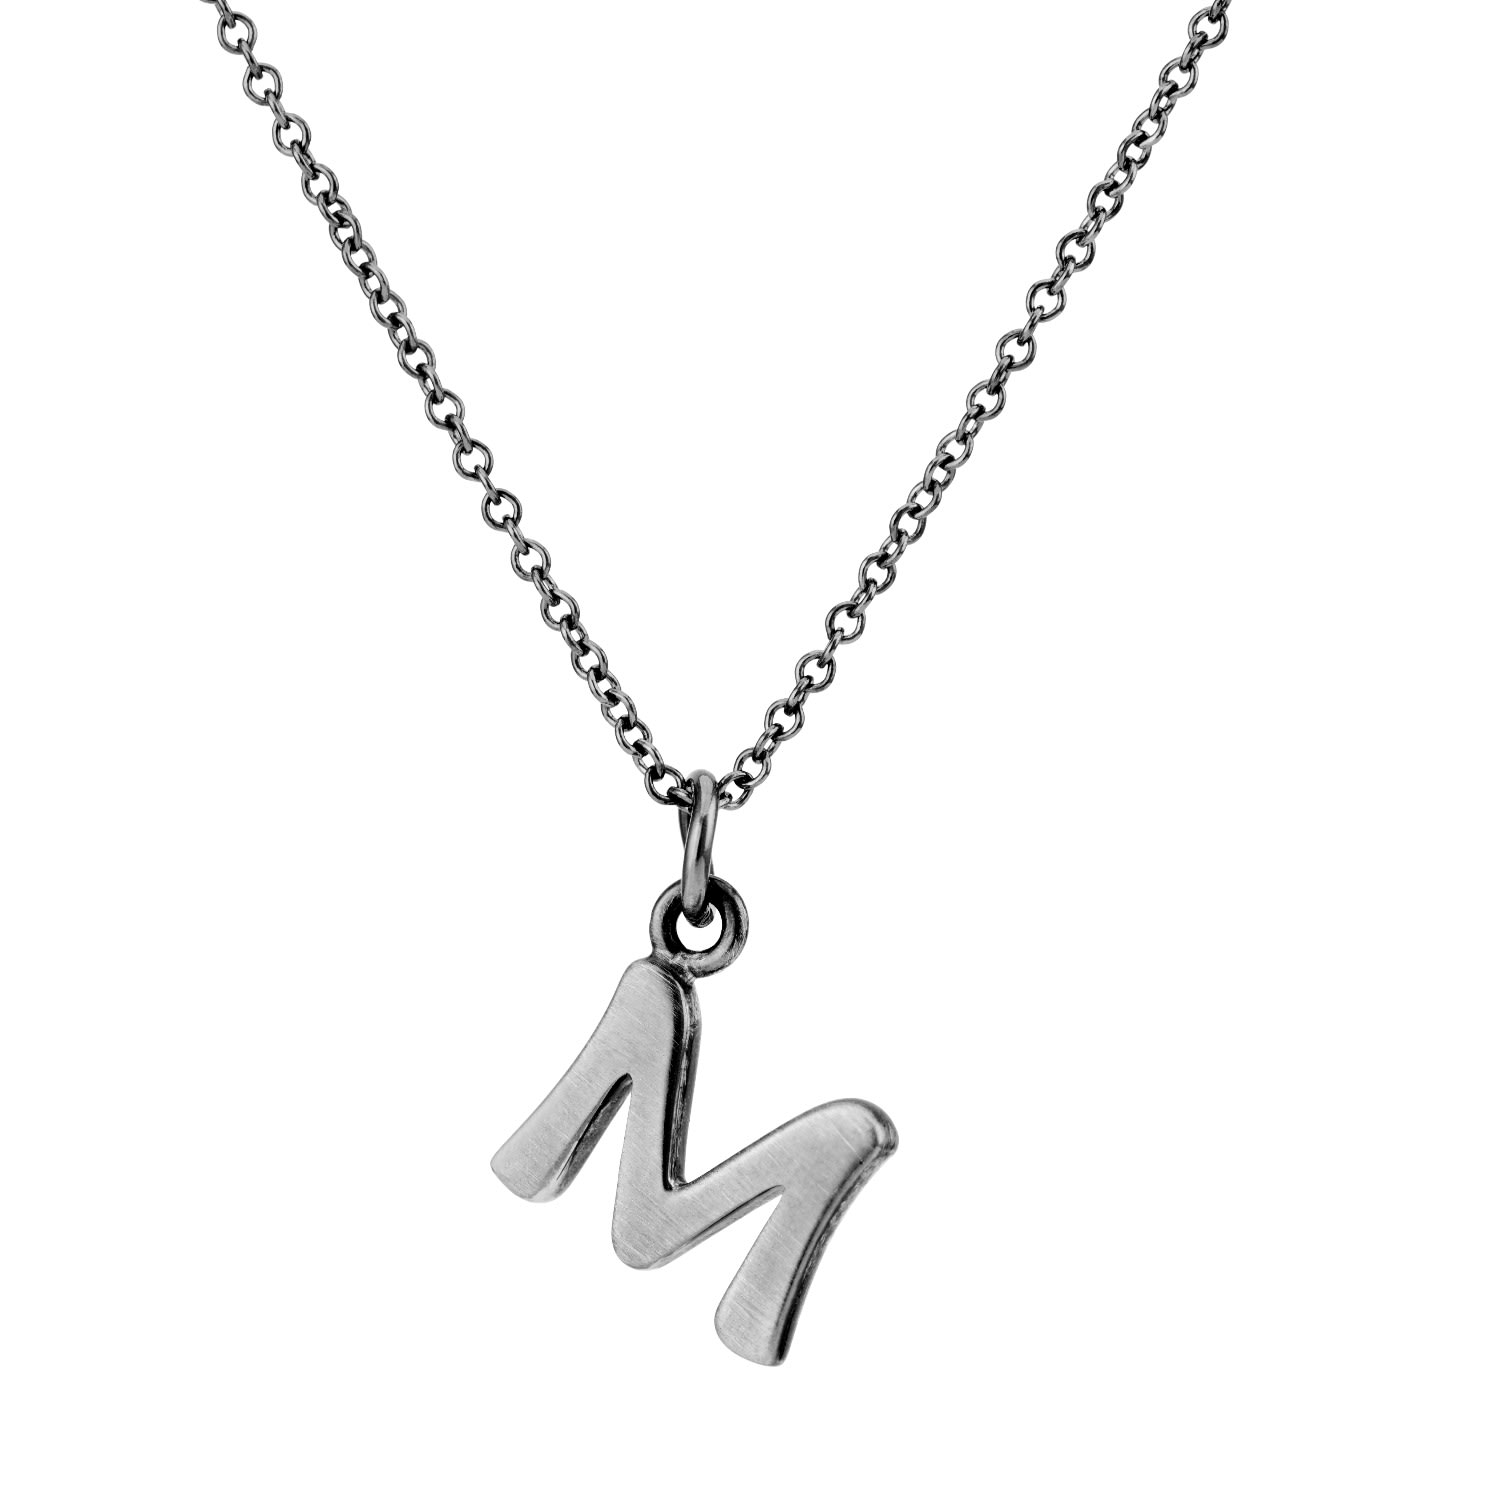 Posh Totty Designs Men's Oxidised Sterling Silver Initial Necklace